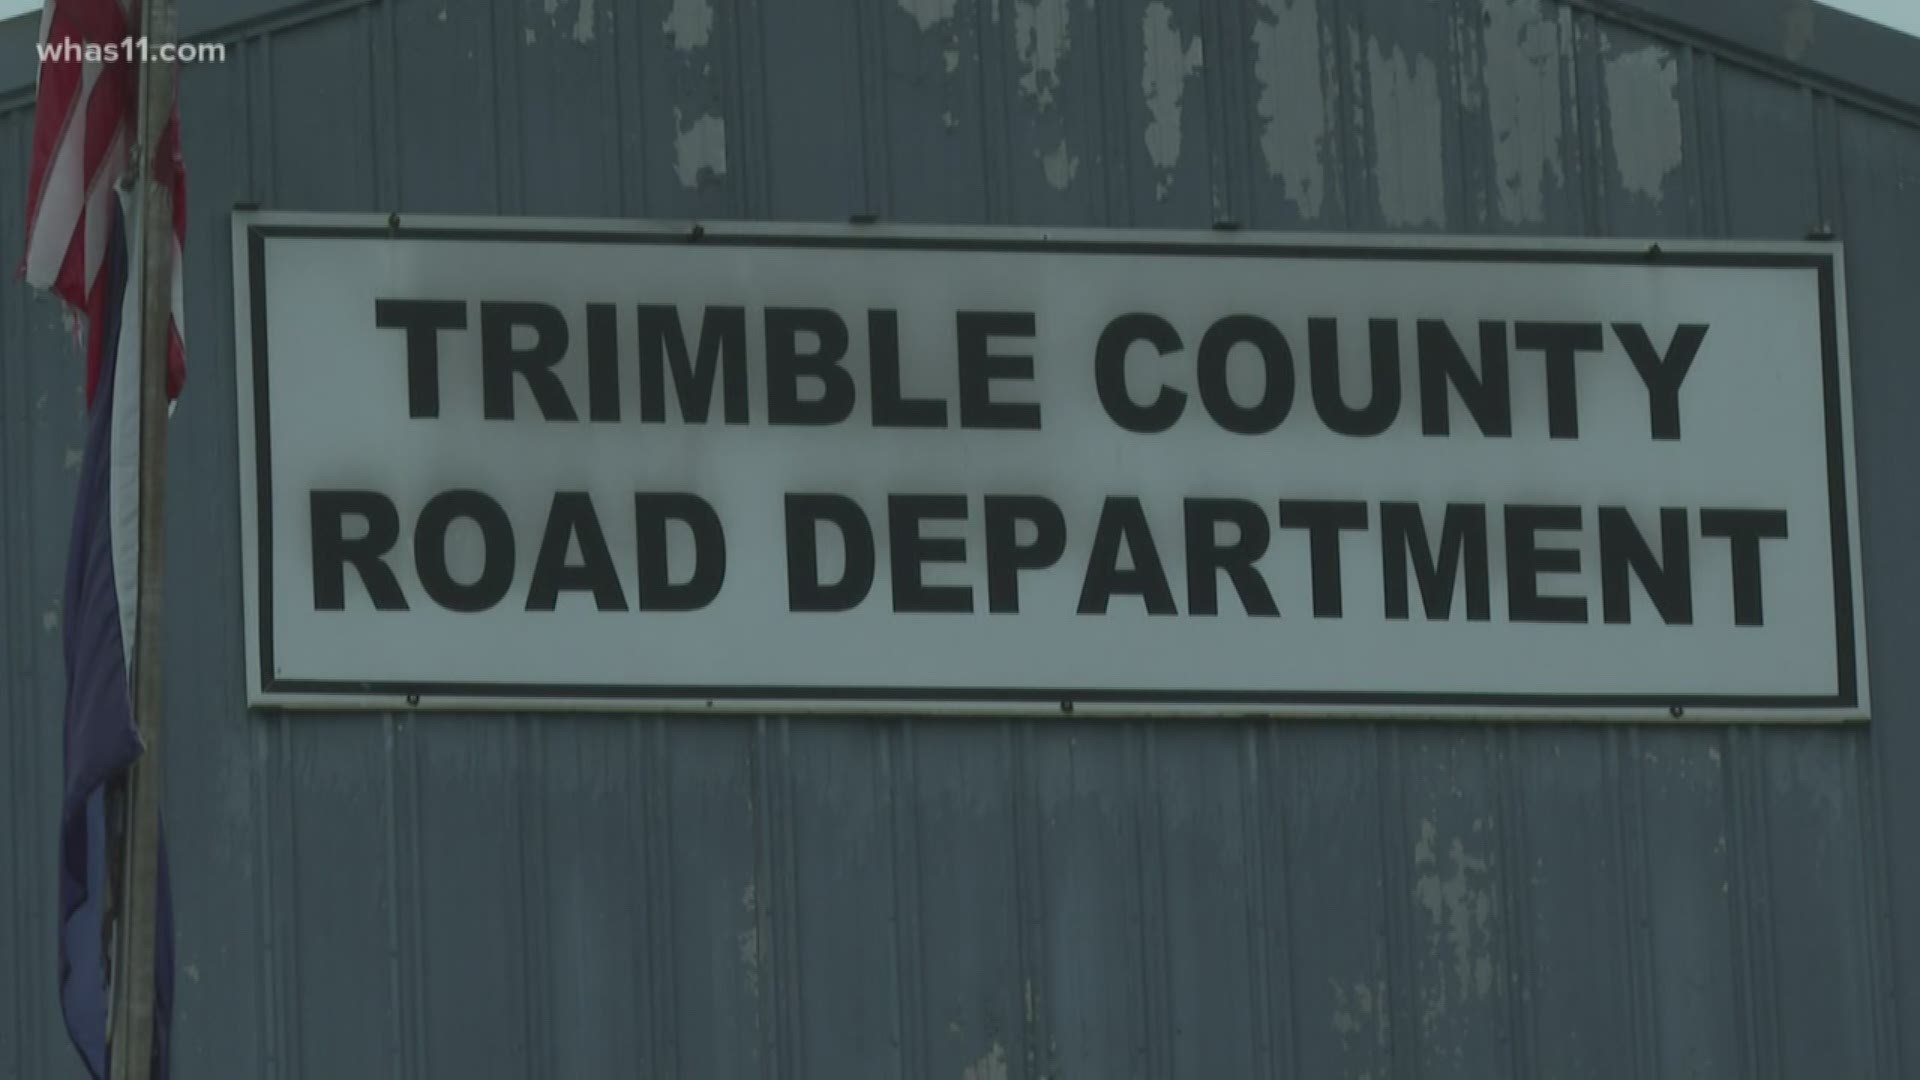 Judge Executive Todd Pollock confirmed that 5 of the 9 road department employees were fired as KSP investigate possible meth dealing.